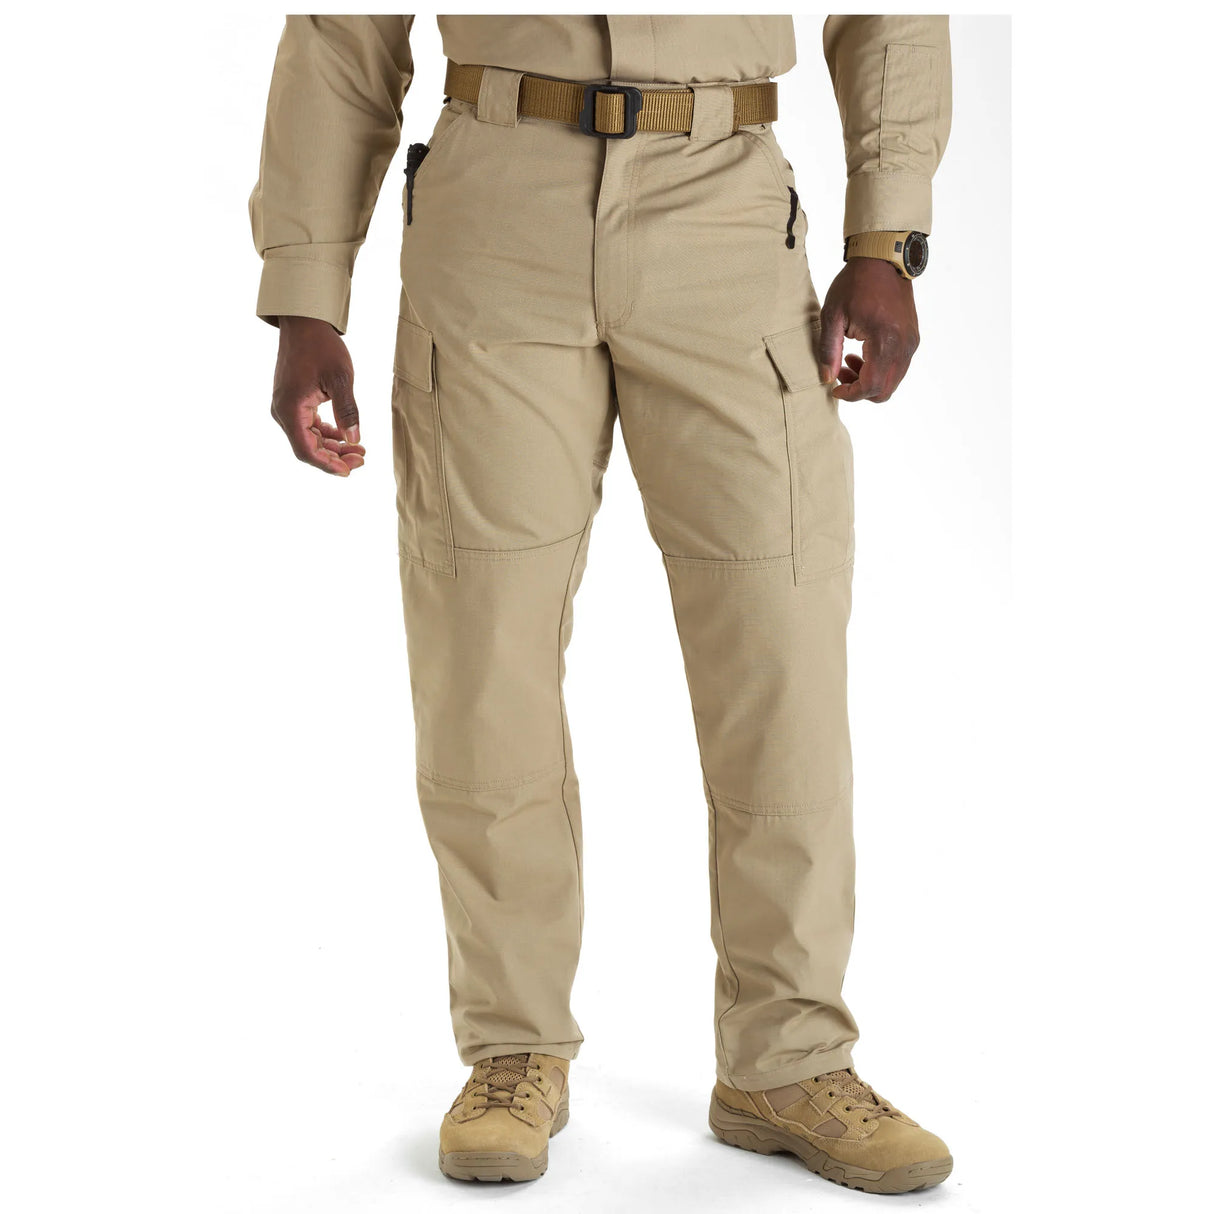 Secure Cargo Pocket Pant: Features integrated magazine compartments for secure storage.